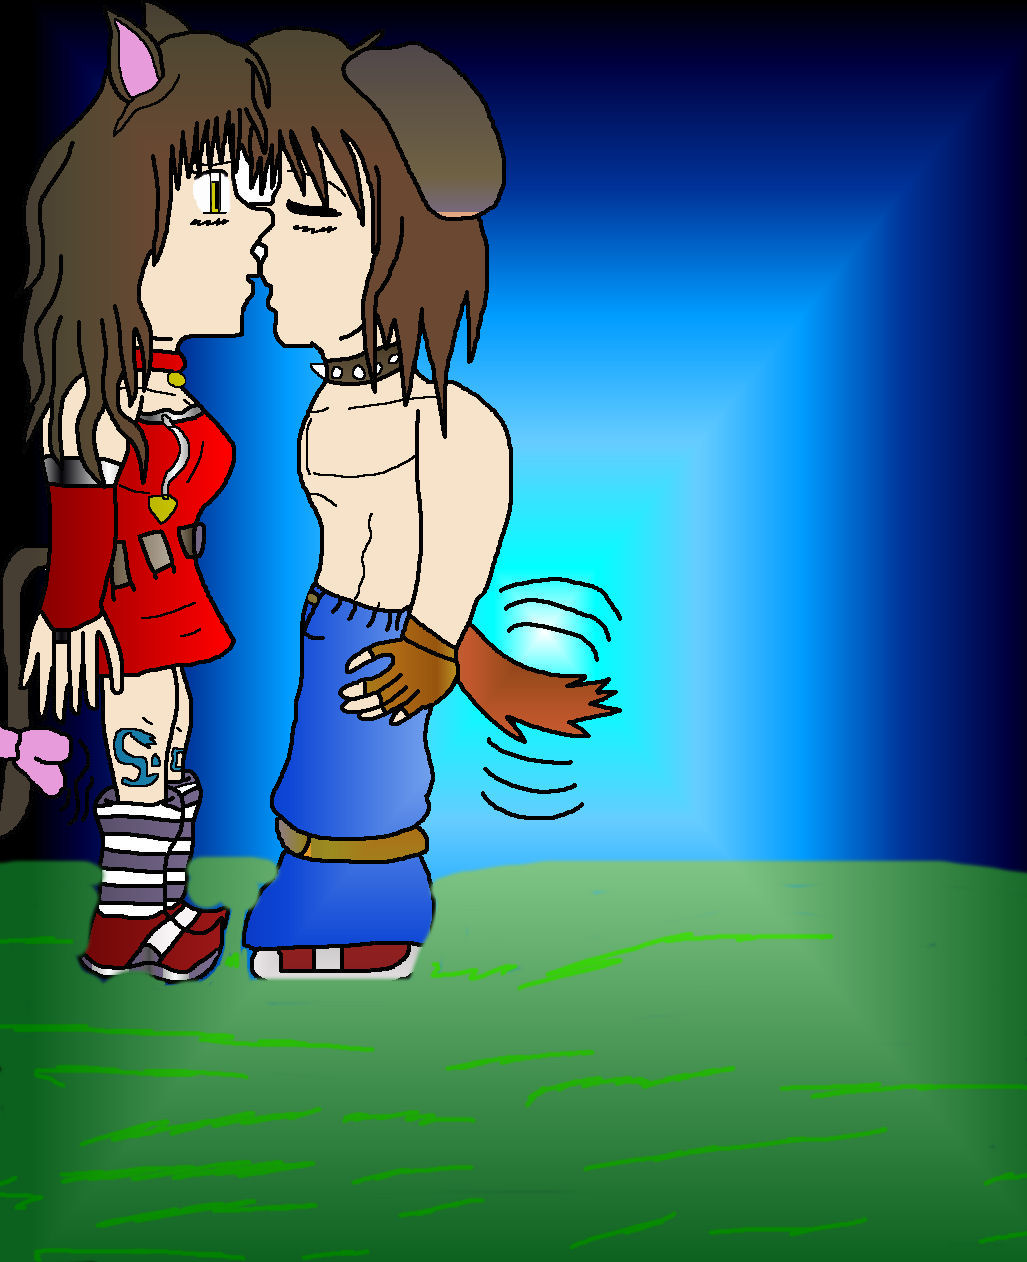 Me and You going to Kiss by tifa